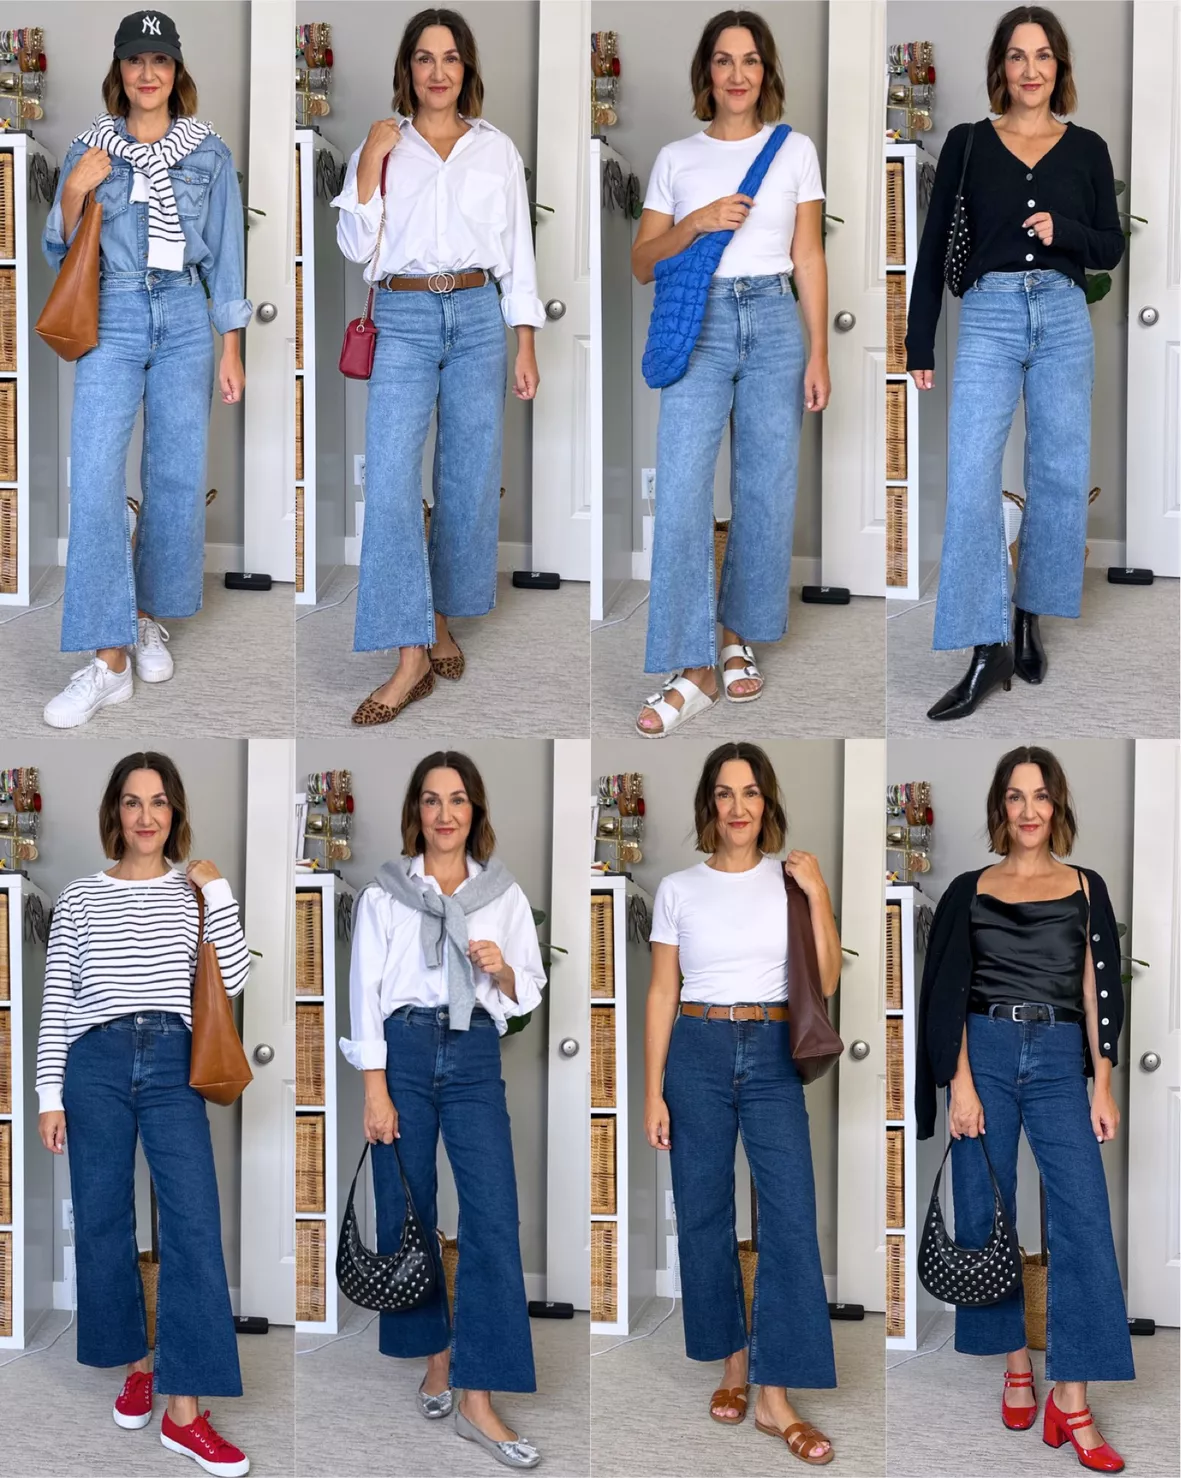 5 Reasons To Wear High Waist Jeans And How To Style Them